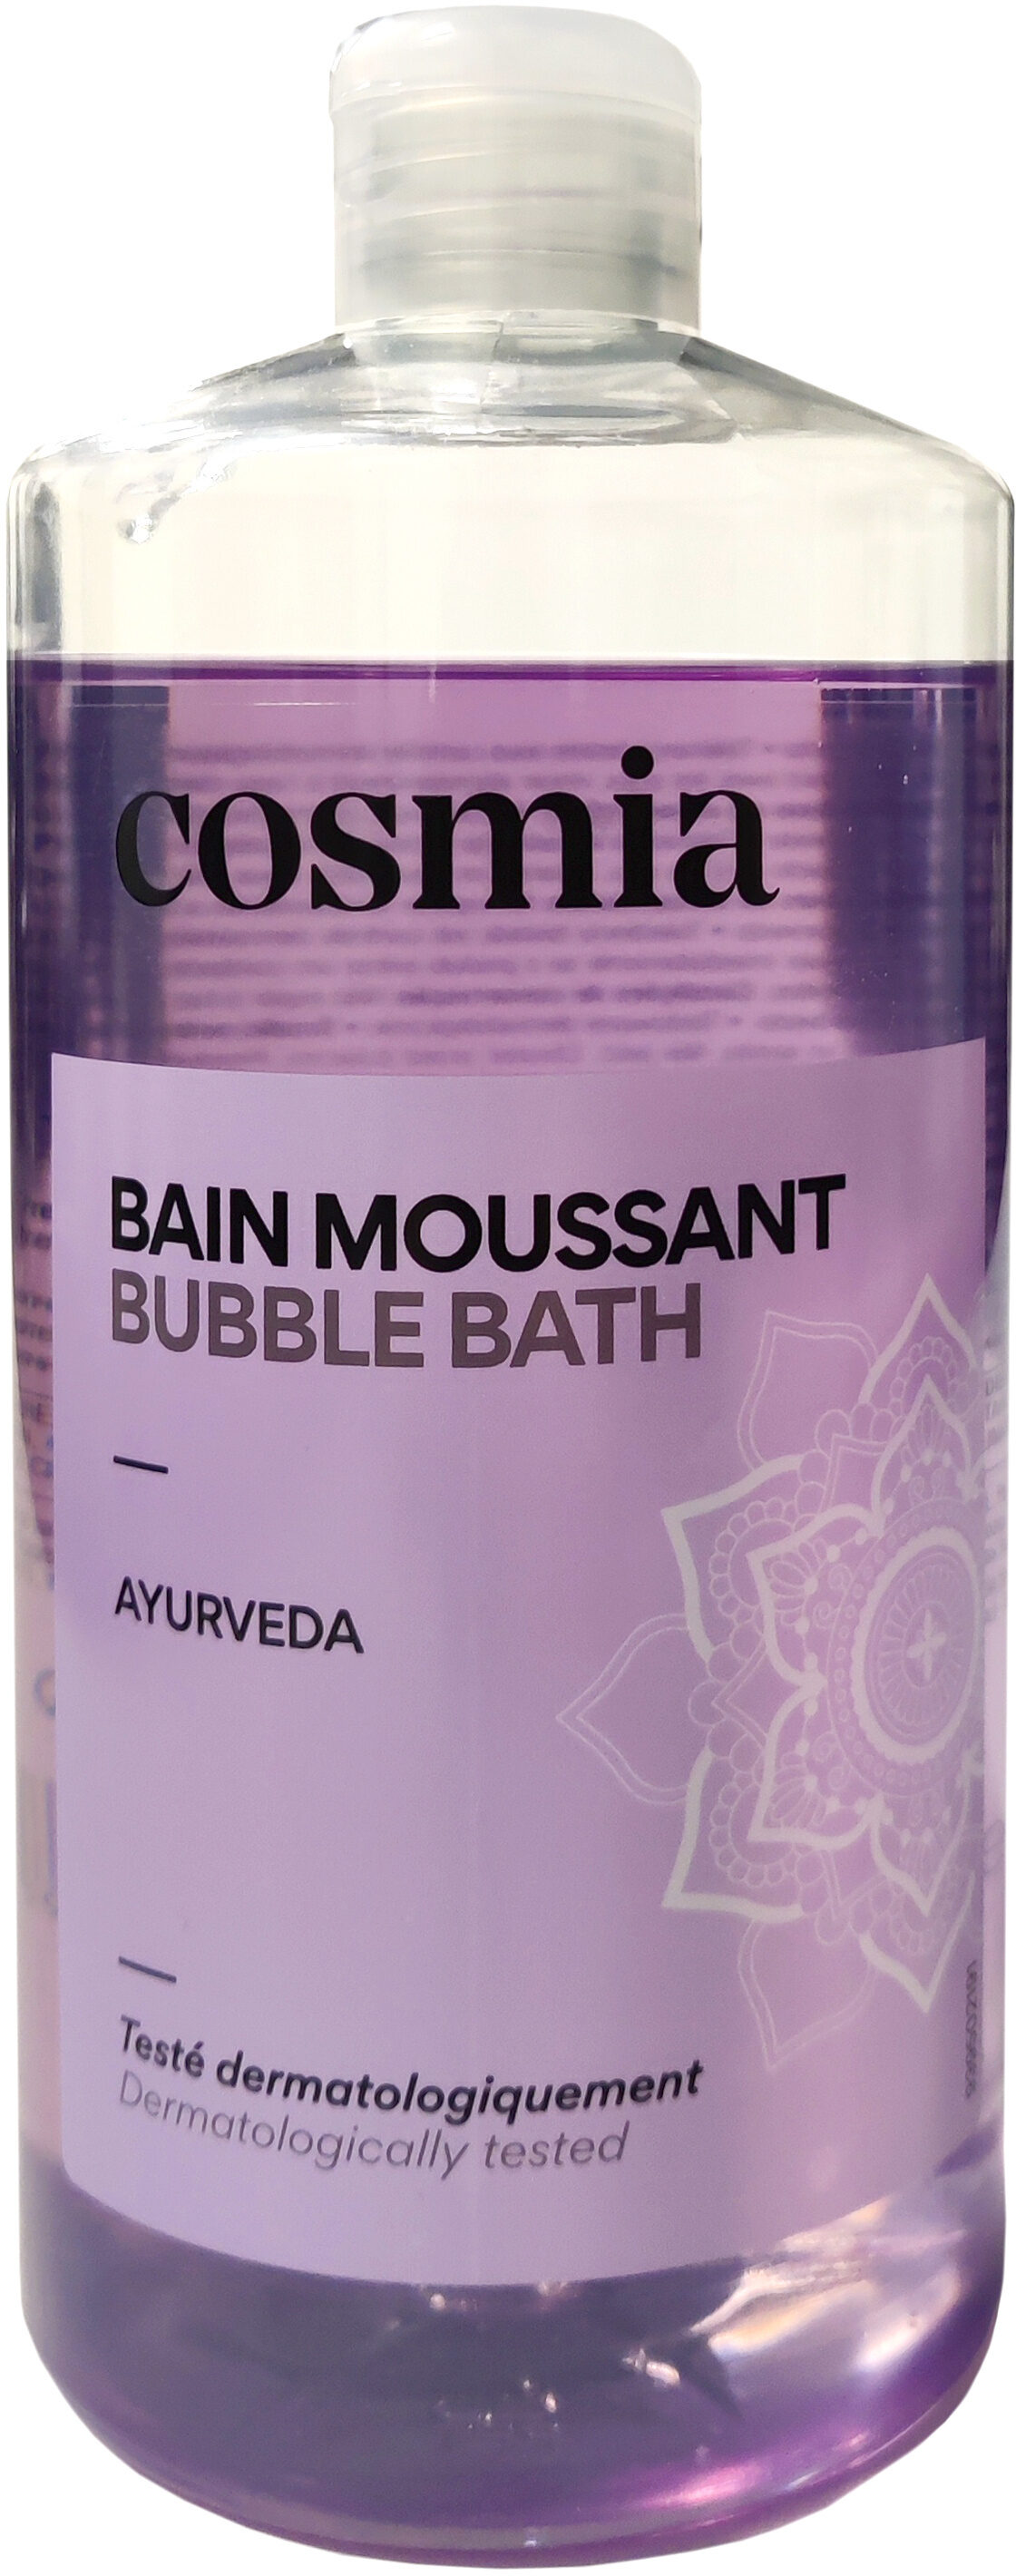 Bain moussant ayurveda - Product - fr